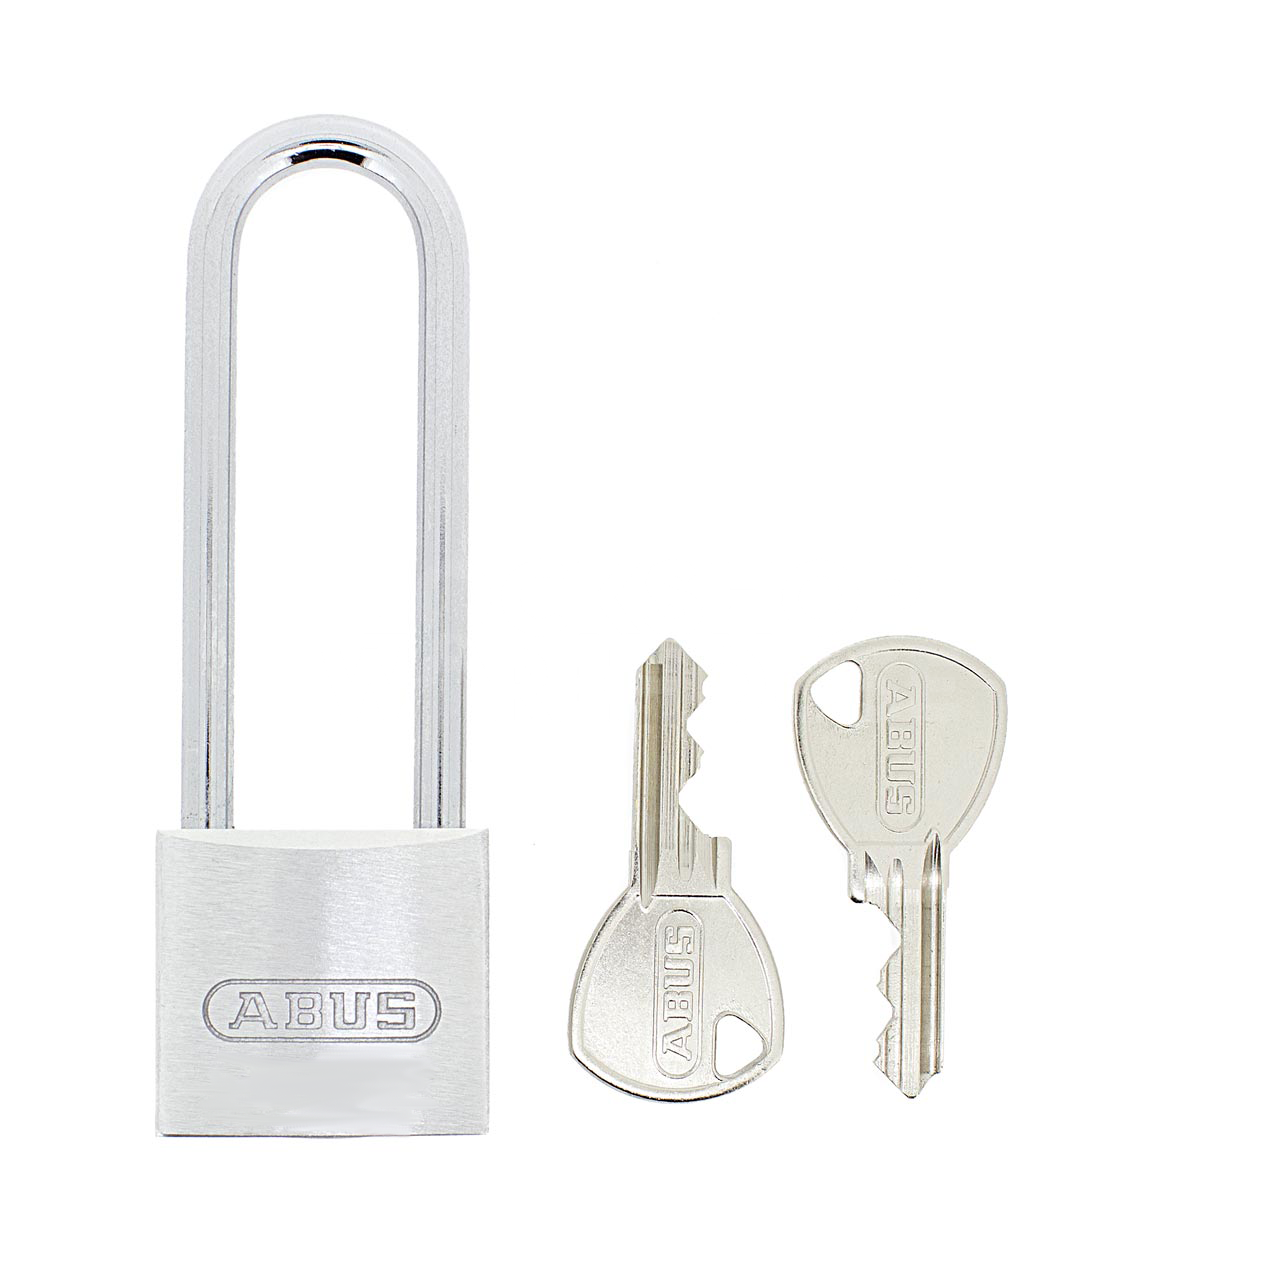 Dimensions Image: ABUS Titalium 64TI/40mm Padlock with 63mm Long Shackle